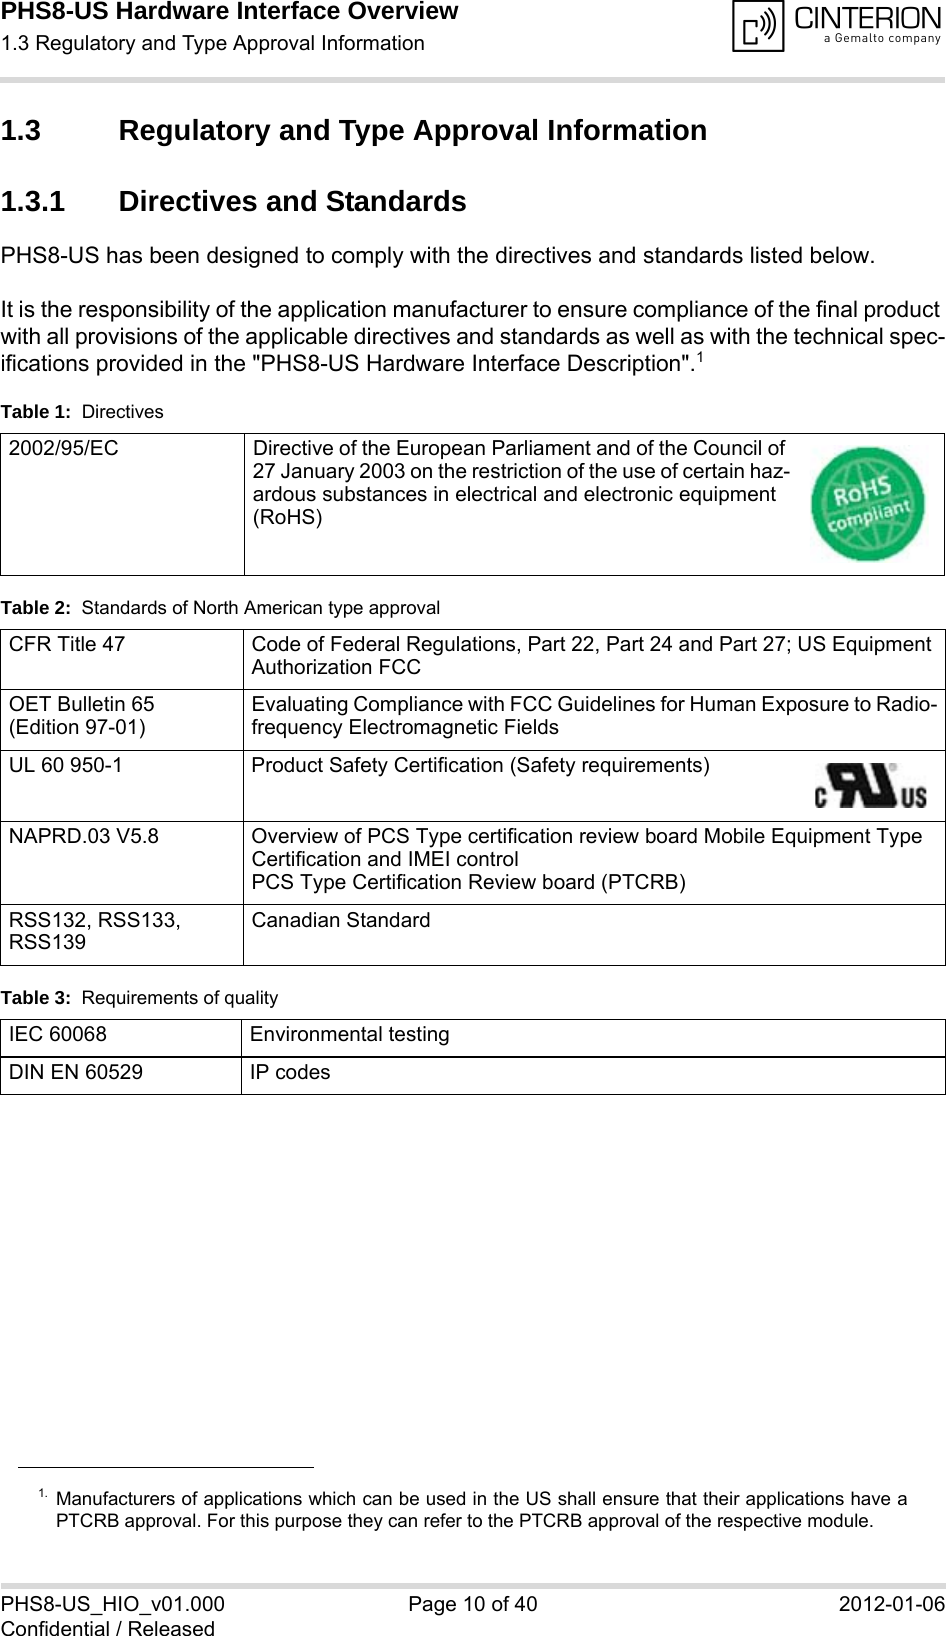 PHS8-US Hardware Interface Overview1.3 Regulatory and Type Approval Information14PHS8-US_HIO_v01.000 Page 10 of 40 2012-01-06Confidential / Released1.3 Regulatory and Type Approval Information1.3.1 Directives and StandardsPHS8-US has been designed to comply with the directives and standards listed below.It is the responsibility of the application manufacturer to ensure compliance of the final product with all provisions of the applicable directives and standards as well as with the technical spec-ifications provided in the &quot;PHS8-US Hardware Interface Description&quot;.11. Manufacturers of applications which can be used in the US shall ensure that their applications have aPTCRB approval. For this purpose they can refer to the PTCRB approval of the respective module. Table 1:  Directives2002/95/EC  Directive of the European Parliament and of the Council of 27 January 2003 on the restriction of the use of certain haz-ardous substances in electrical and electronic equipment (RoHS)Table 2:  Standards of North American type approvalCFR Title 47 Code of Federal Regulations, Part 22, Part 24 and Part 27; US Equipment Authorization FCCOET Bulletin 65(Edition 97-01)Evaluating Compliance with FCC Guidelines for Human Exposure to Radio-frequency Electromagnetic FieldsUL 60 950-1 Product Safety Certification (Safety requirements) NAPRD.03 V5.8 Overview of PCS Type certification review board Mobile Equipment Type Certification and IMEI controlPCS Type Certification Review board (PTCRB)RSS132, RSS133, RSS139Canadian StandardTable 3:  Requirements of qualityIEC 60068 Environmental testingDIN EN 60529 IP codes